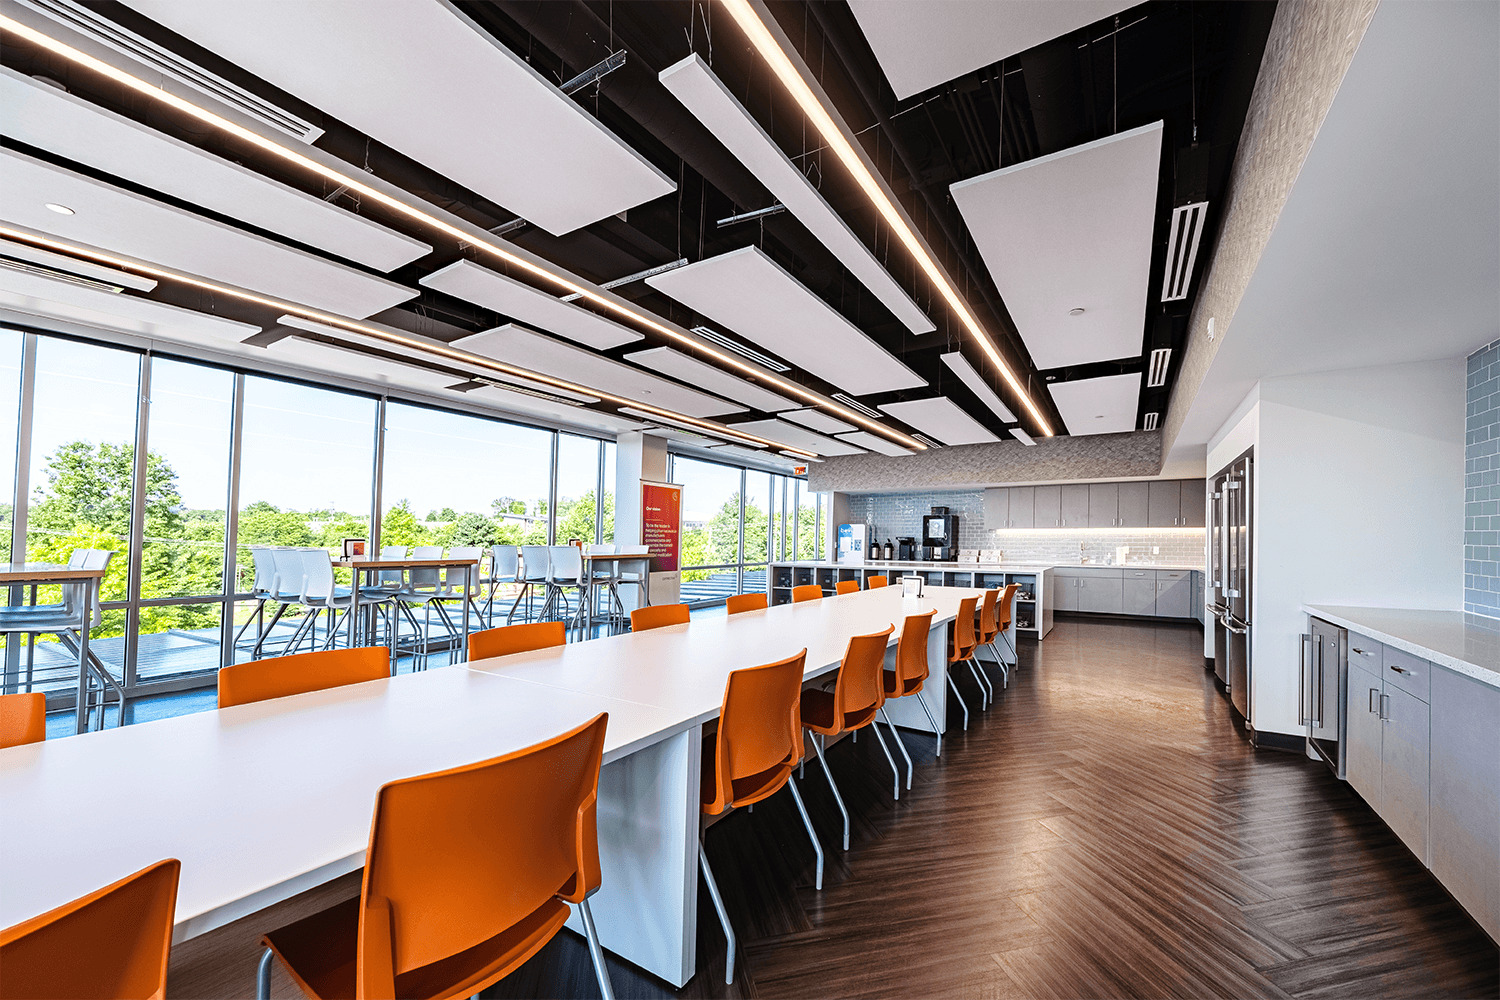 large café/break area with white tables and vibrant orange chairs